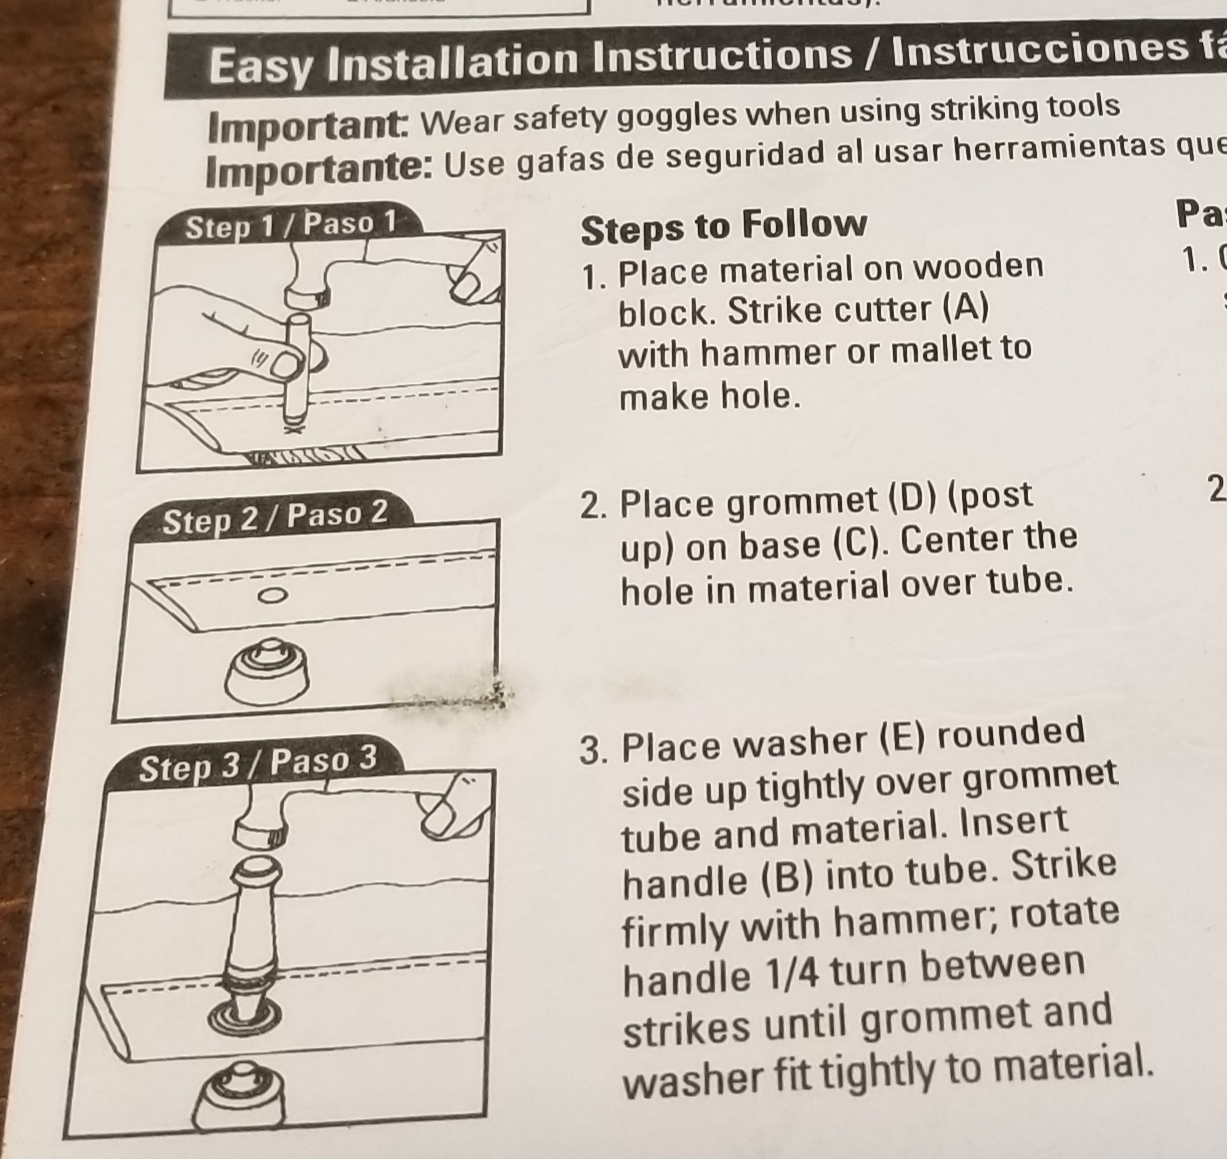 2 the instructions